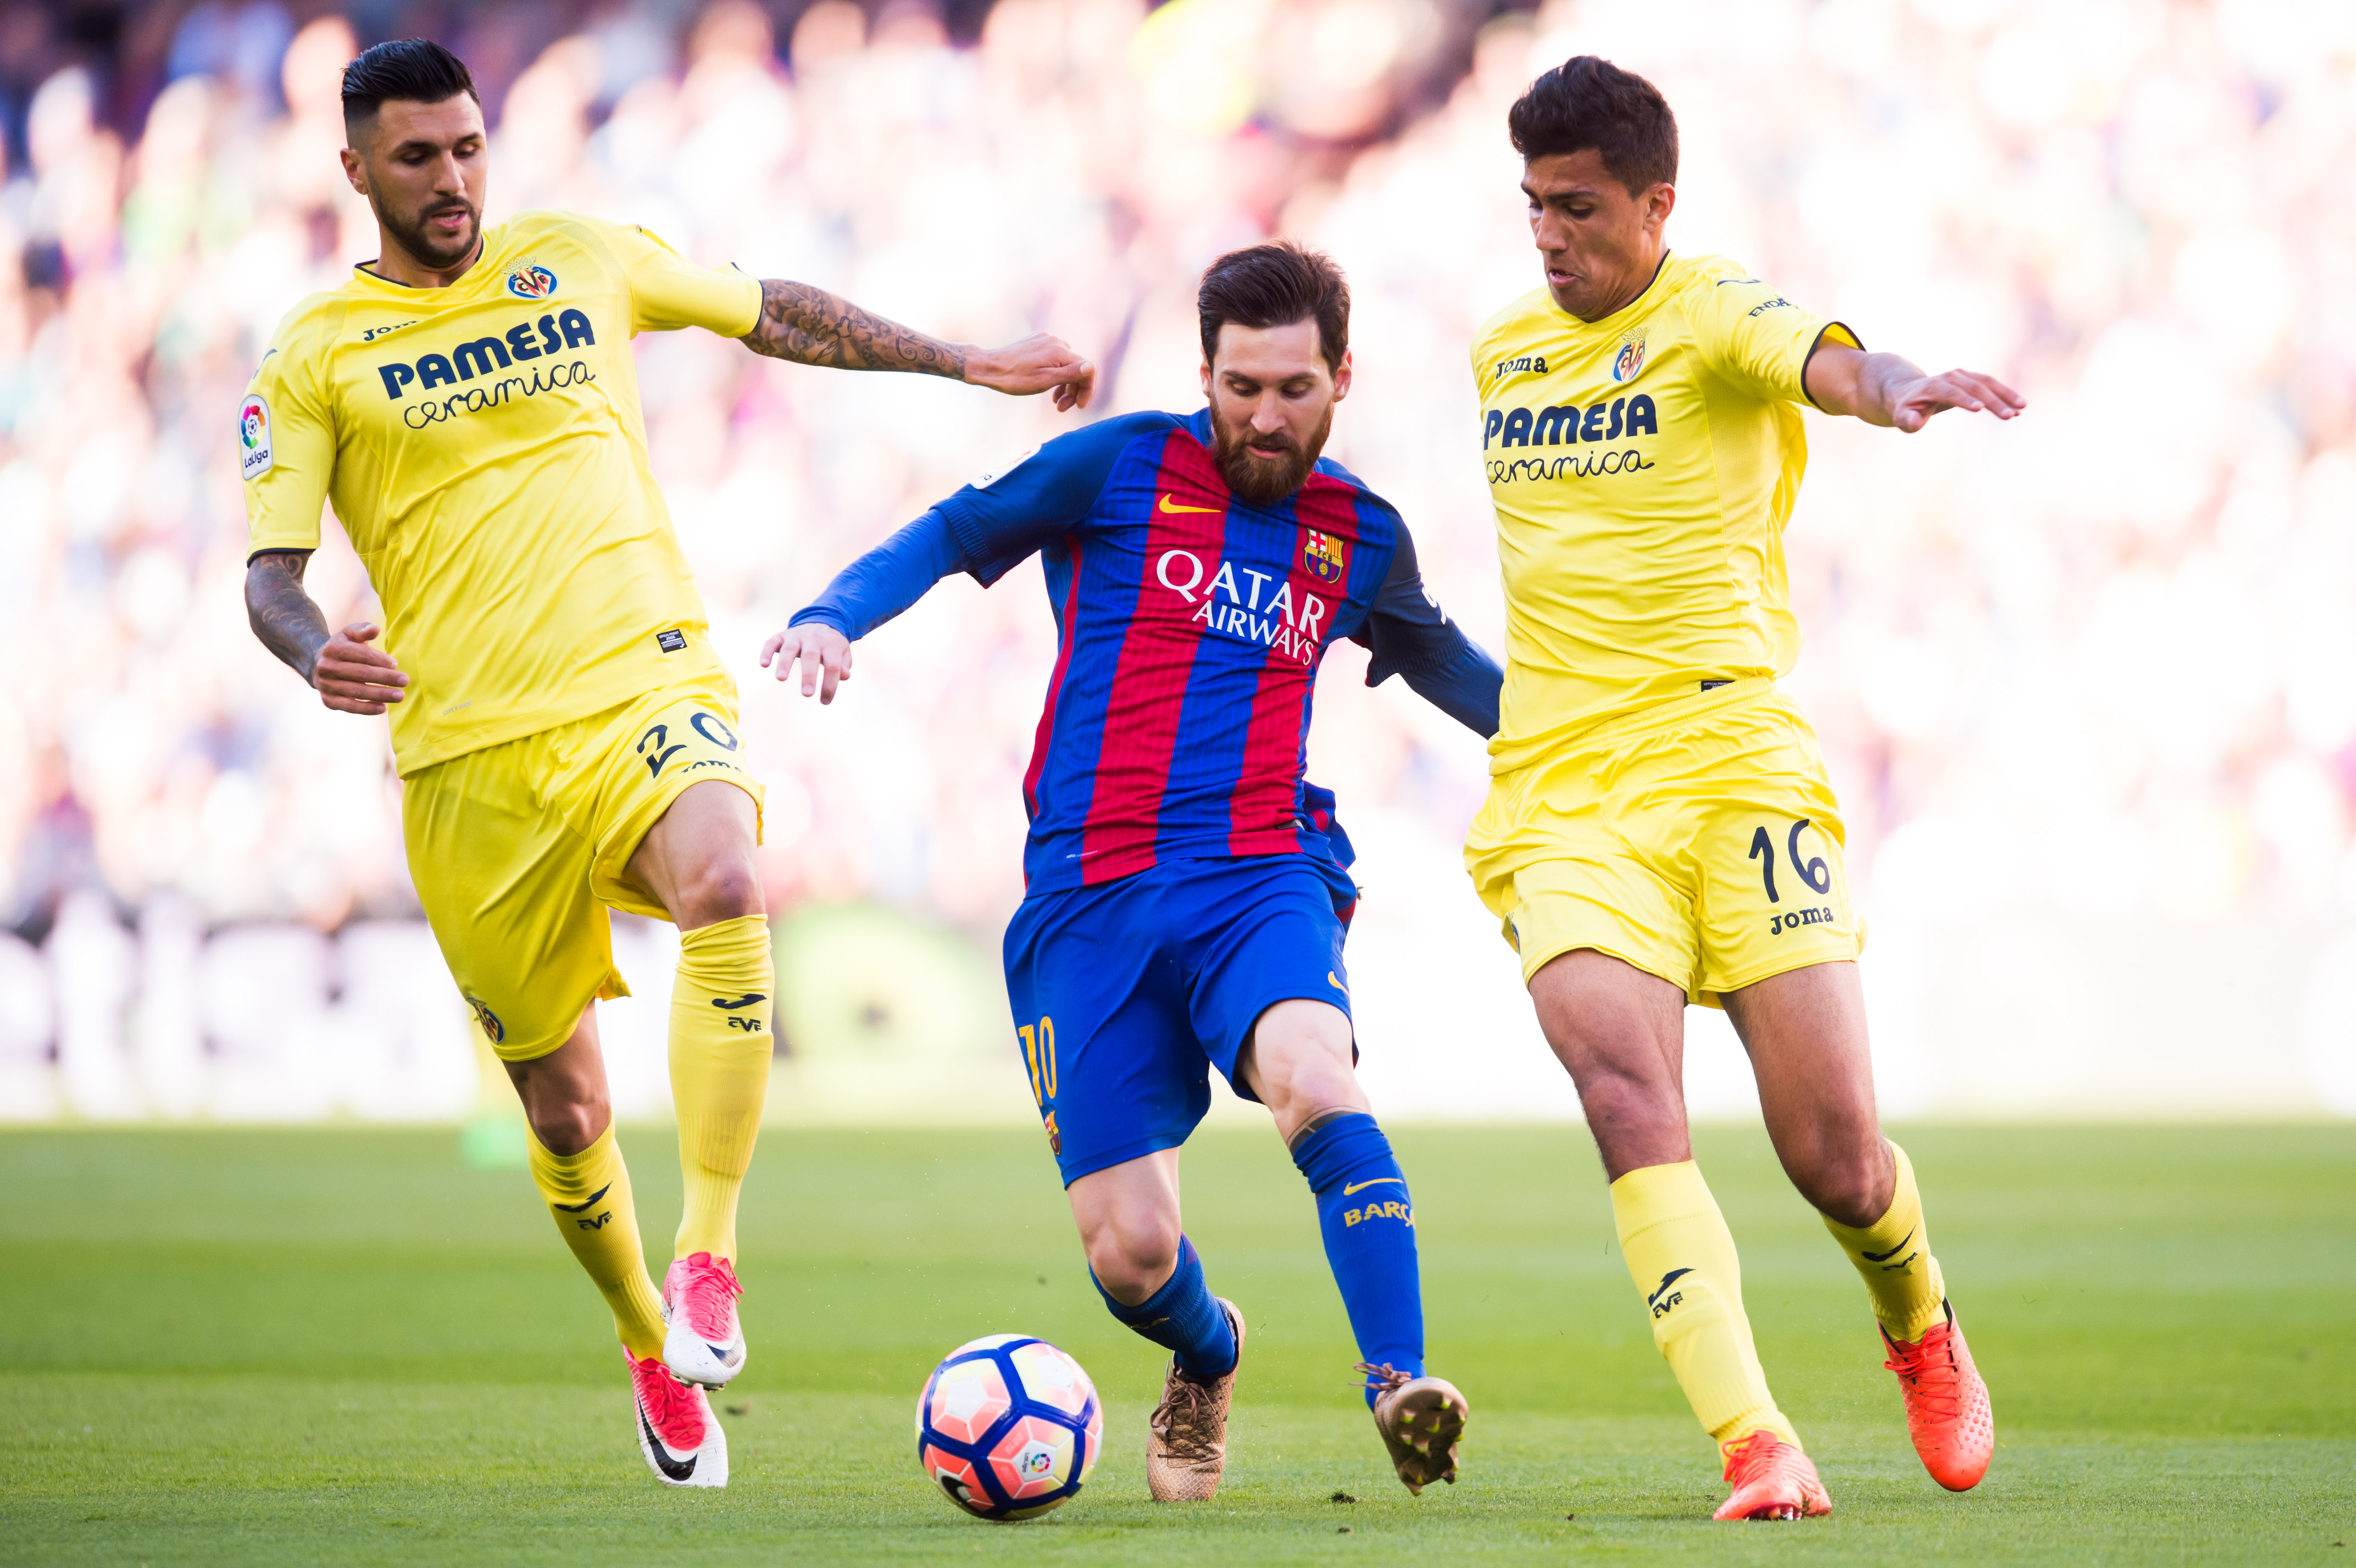 BARCELONA, SPAIN - MAY 06:  Lionel Messi (C) of FC Barcelona competes for the ball with Roberto Soriano (L) and Rodrigo Hernandez (R) of Villarreal CF during the La Liga match between FC Barcelona and Villarreal CF at Camp Nou stadium on May 6, 2017 in Barcelona, Spain.  (Photo by Alex Caparros/Getty Images)